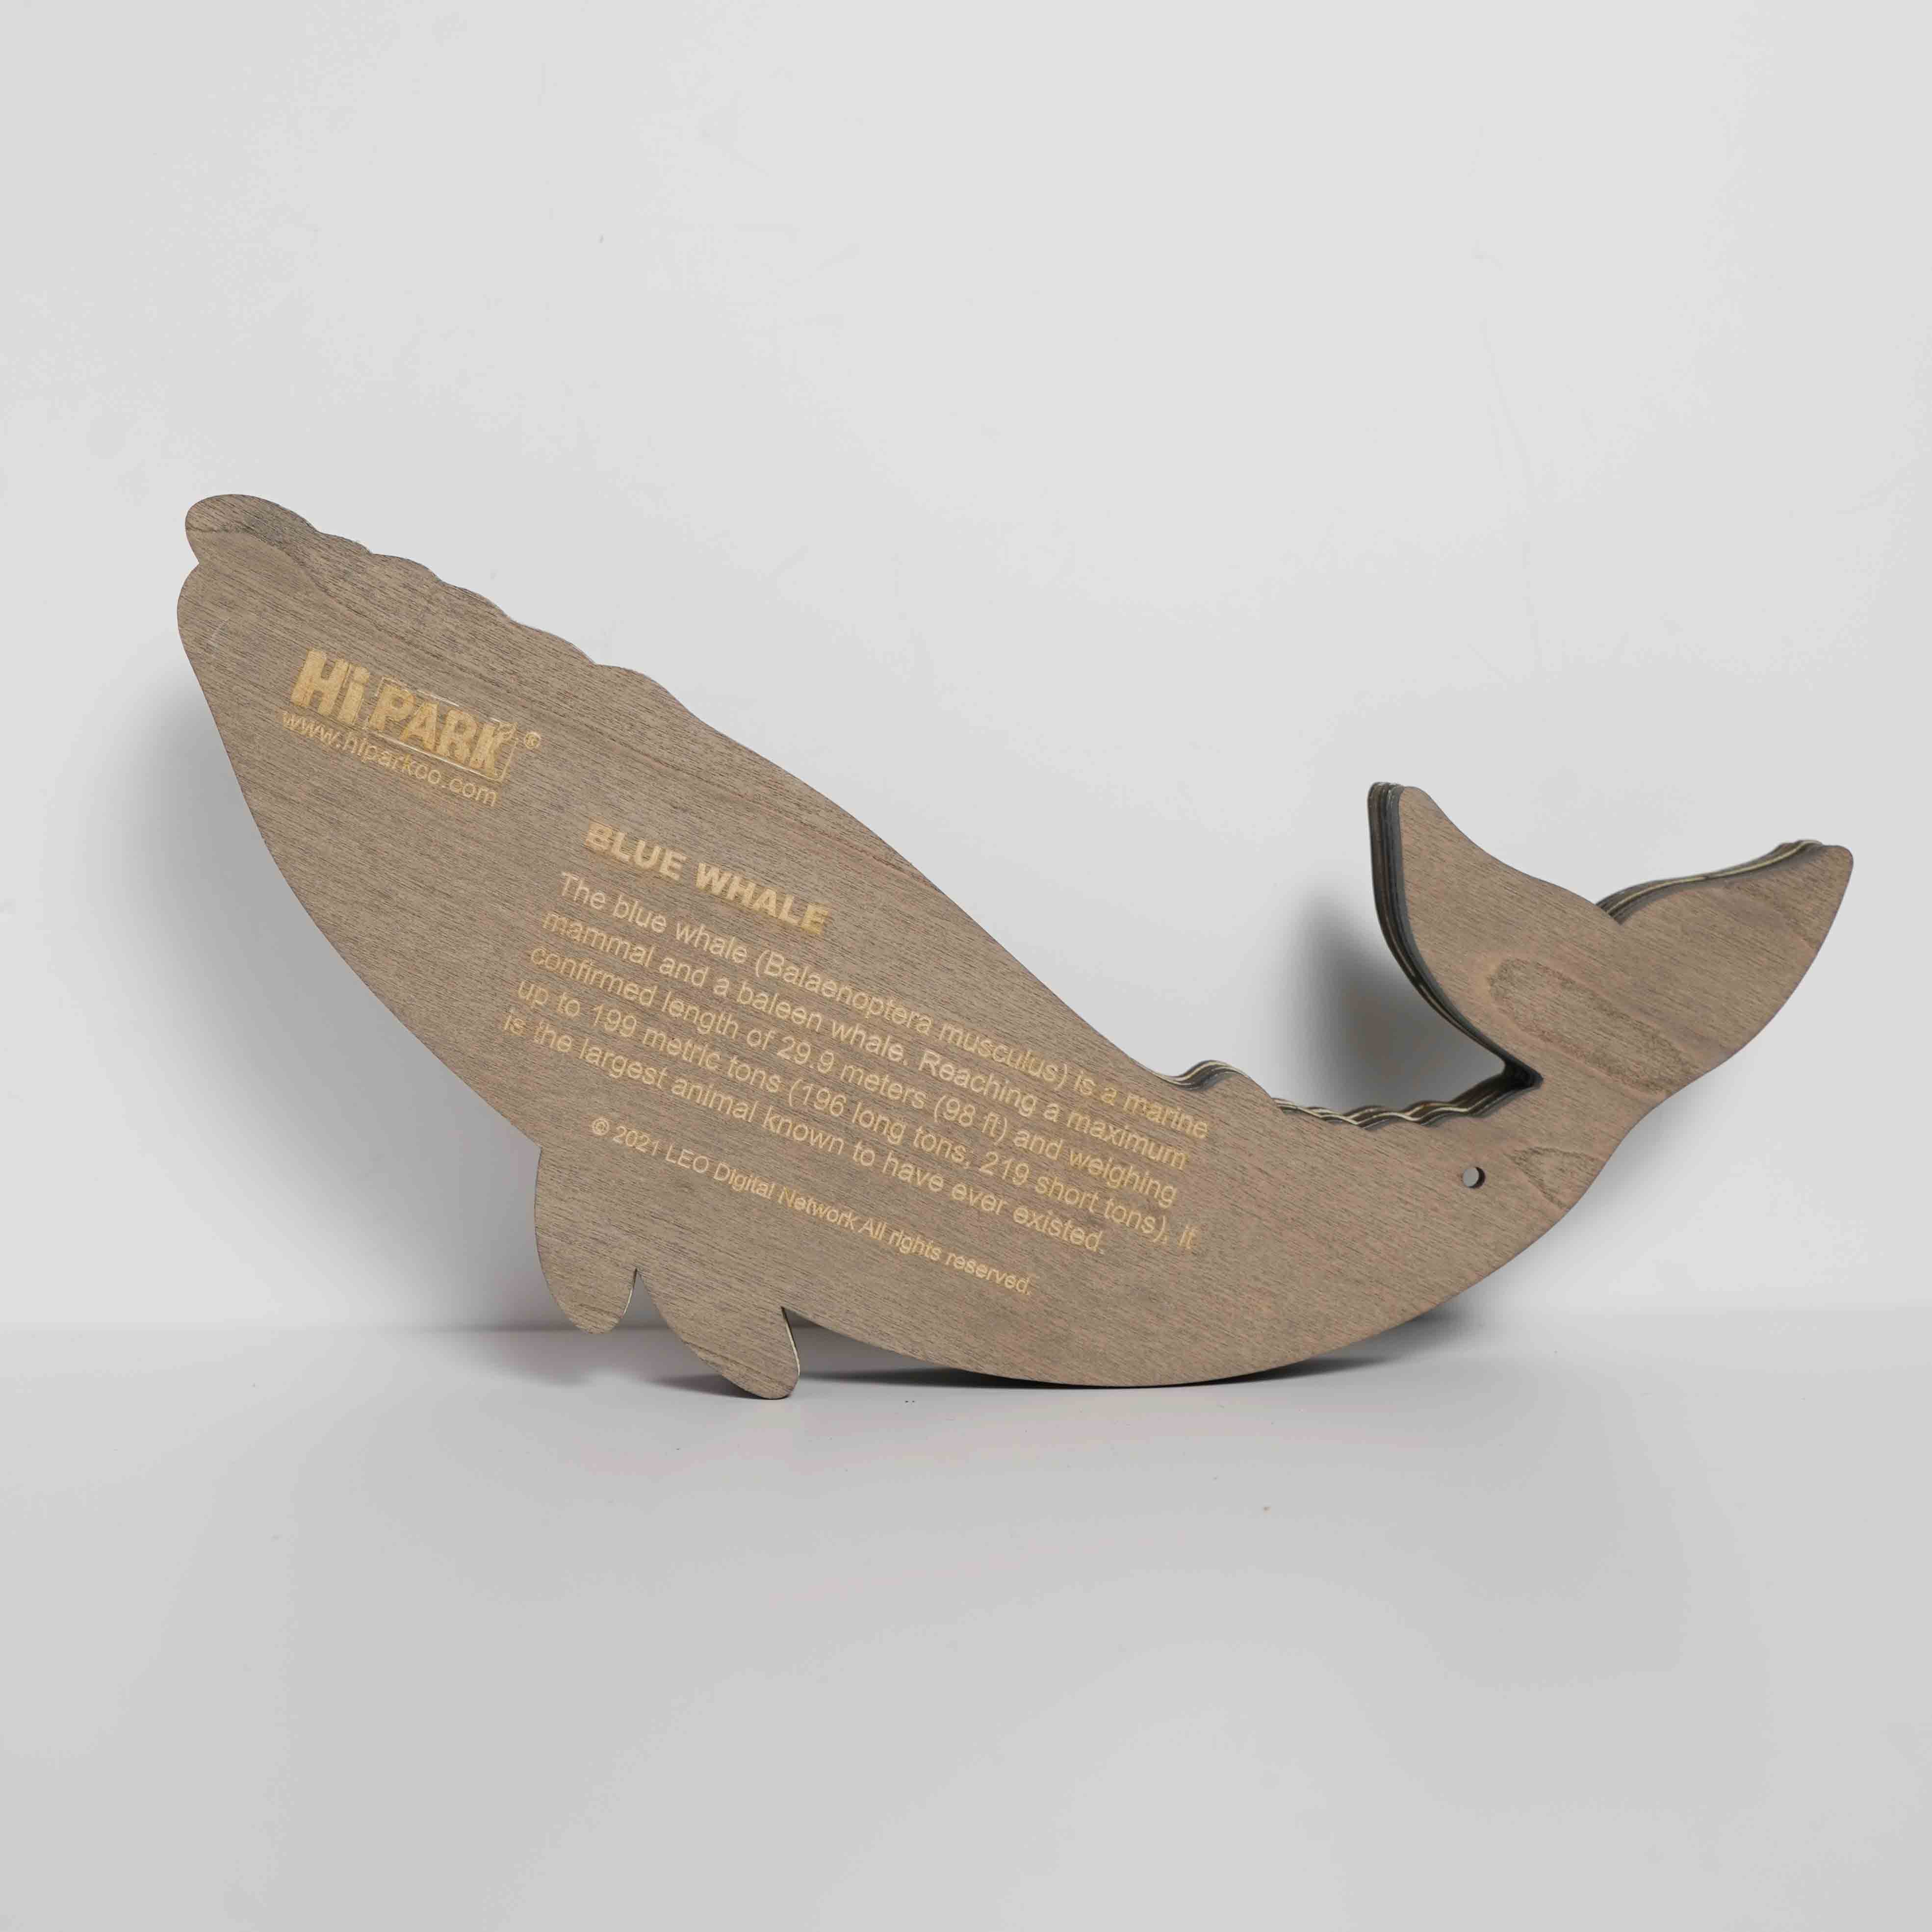 Blue Whale Wooden Carving Gift